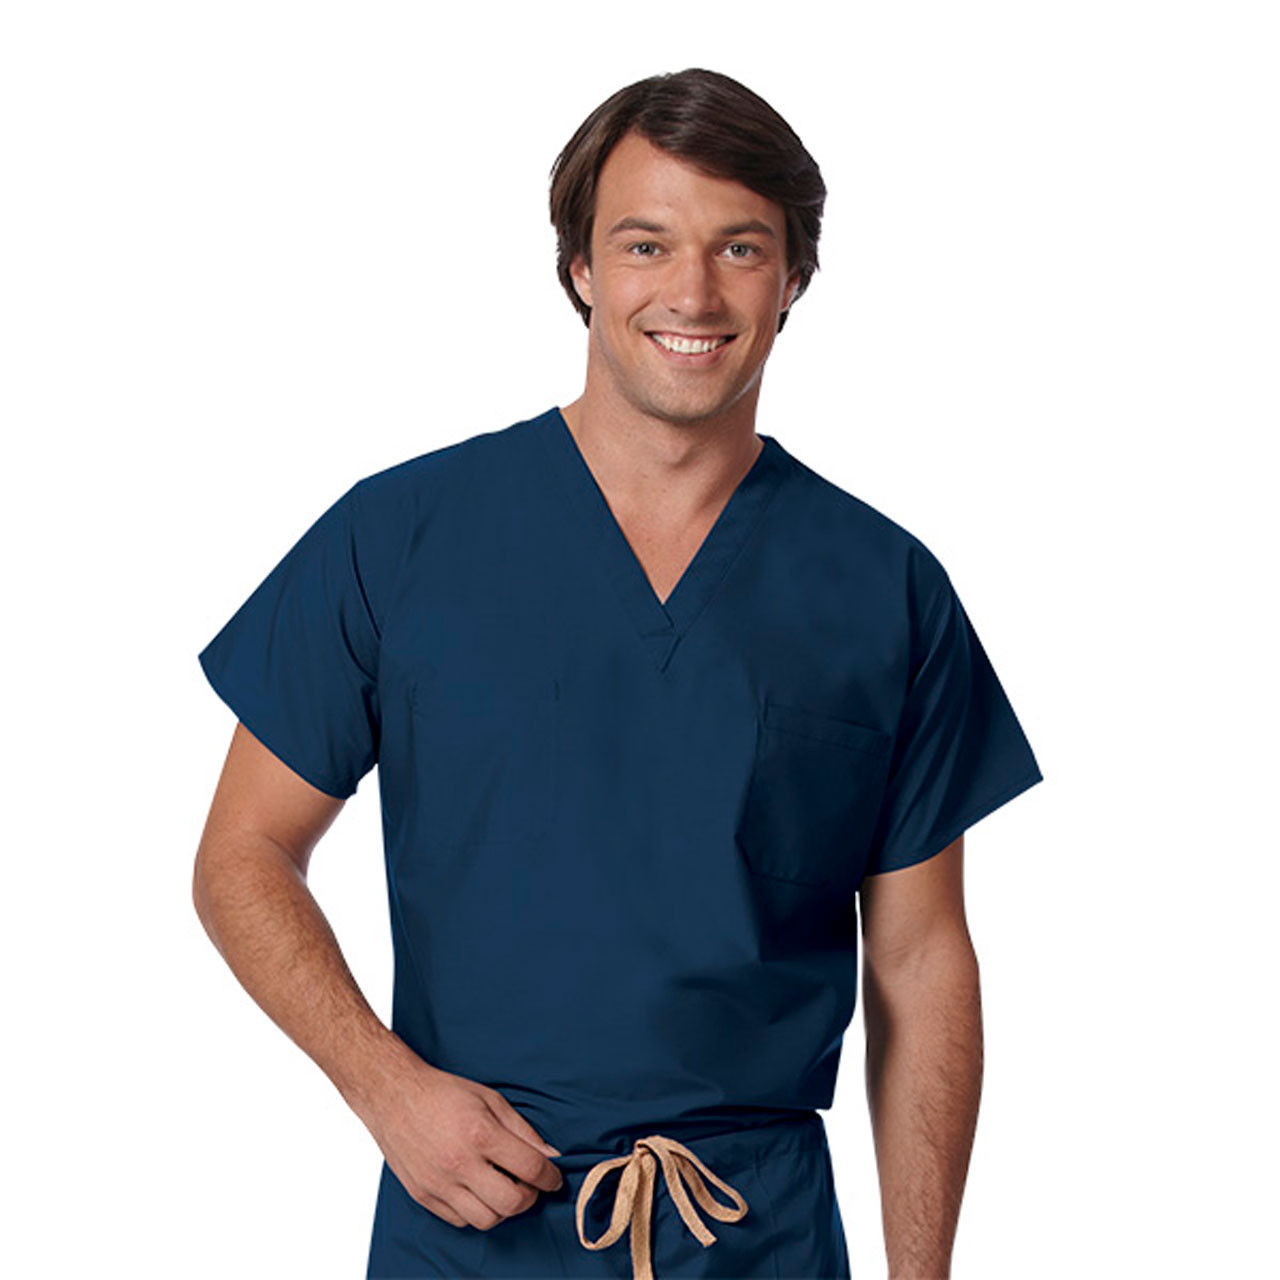 Does the navy surgical scrubs top have a specific neckline style?